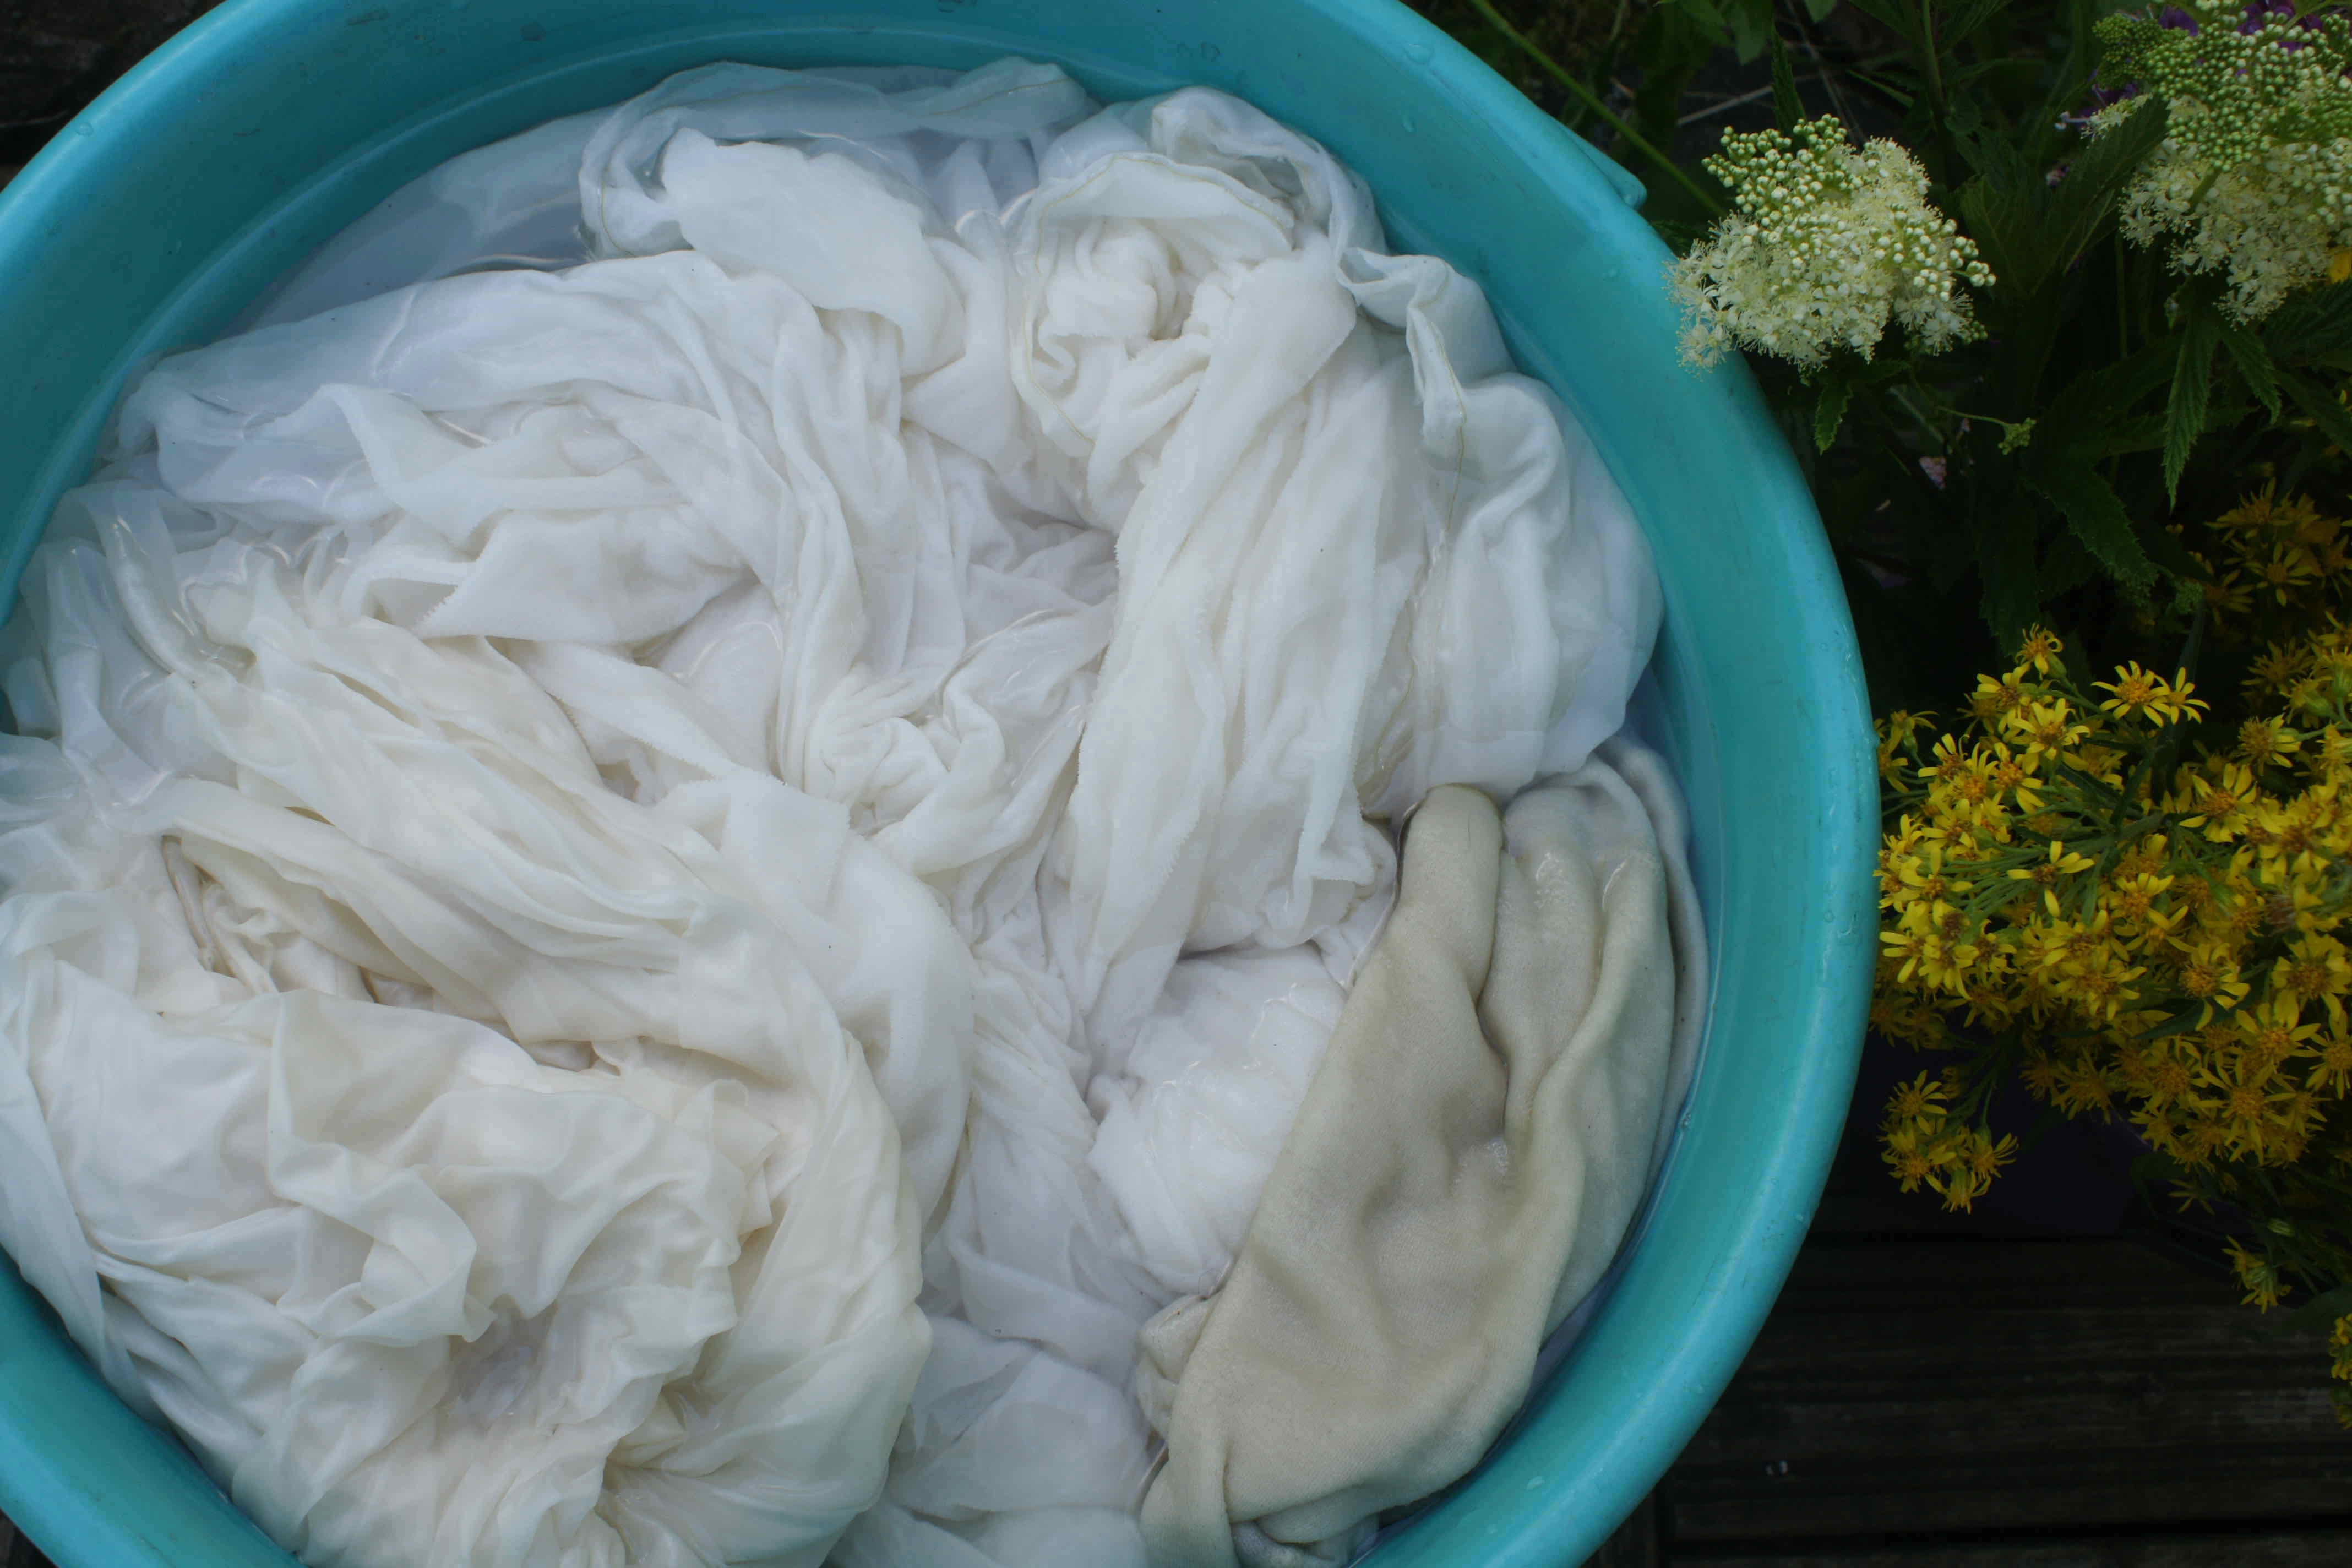 White fabrics in a mordanting solution in a bucket.